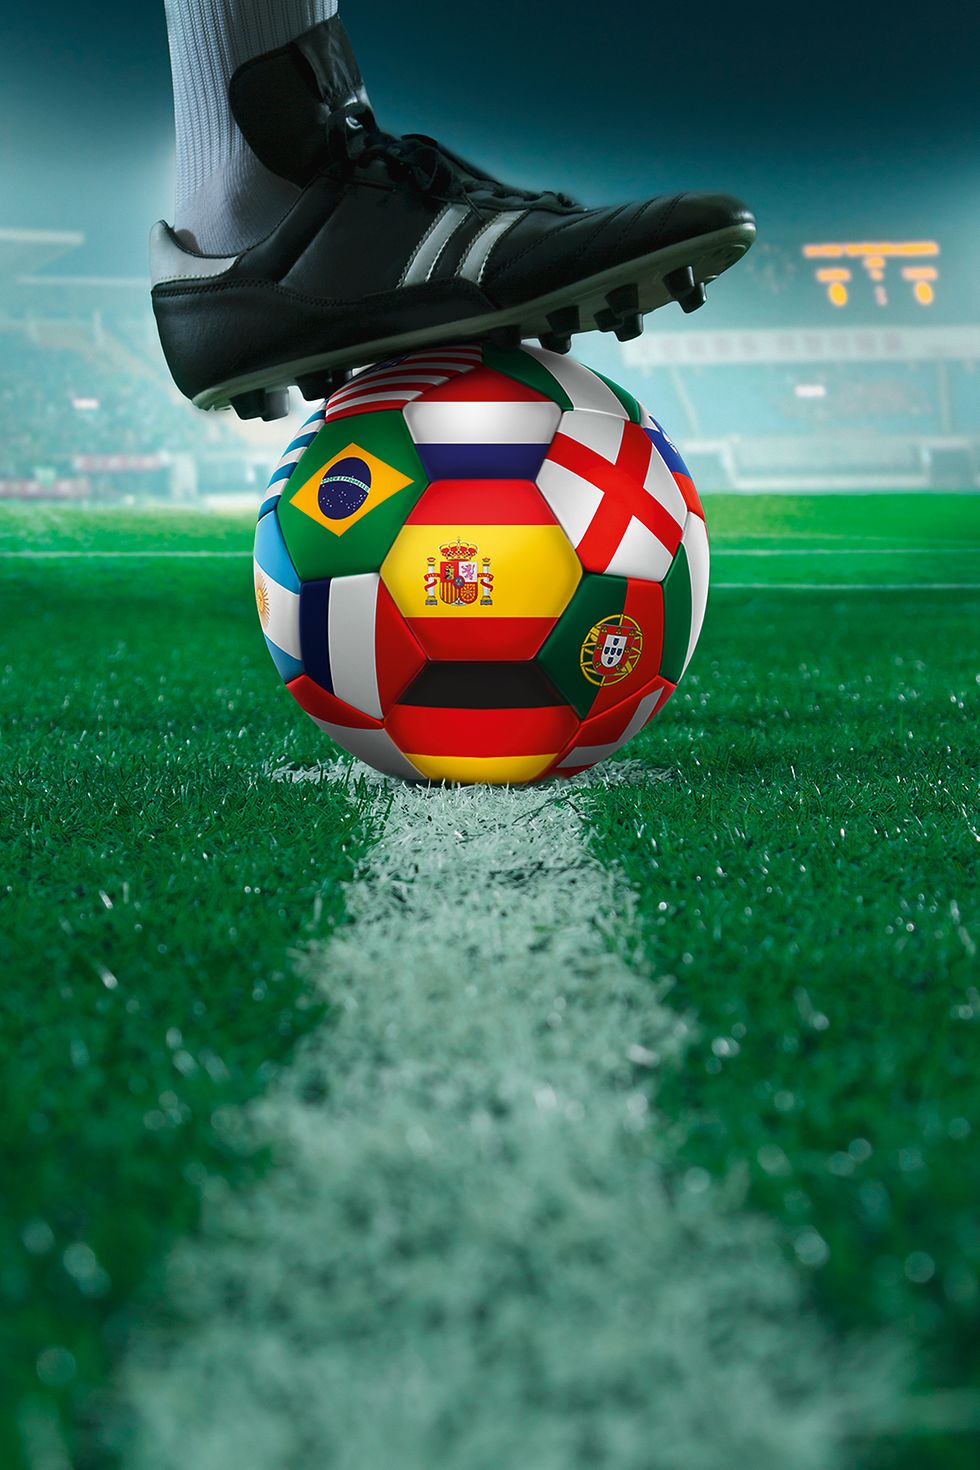 Both the boots and the ball have major influences on soccer matches.